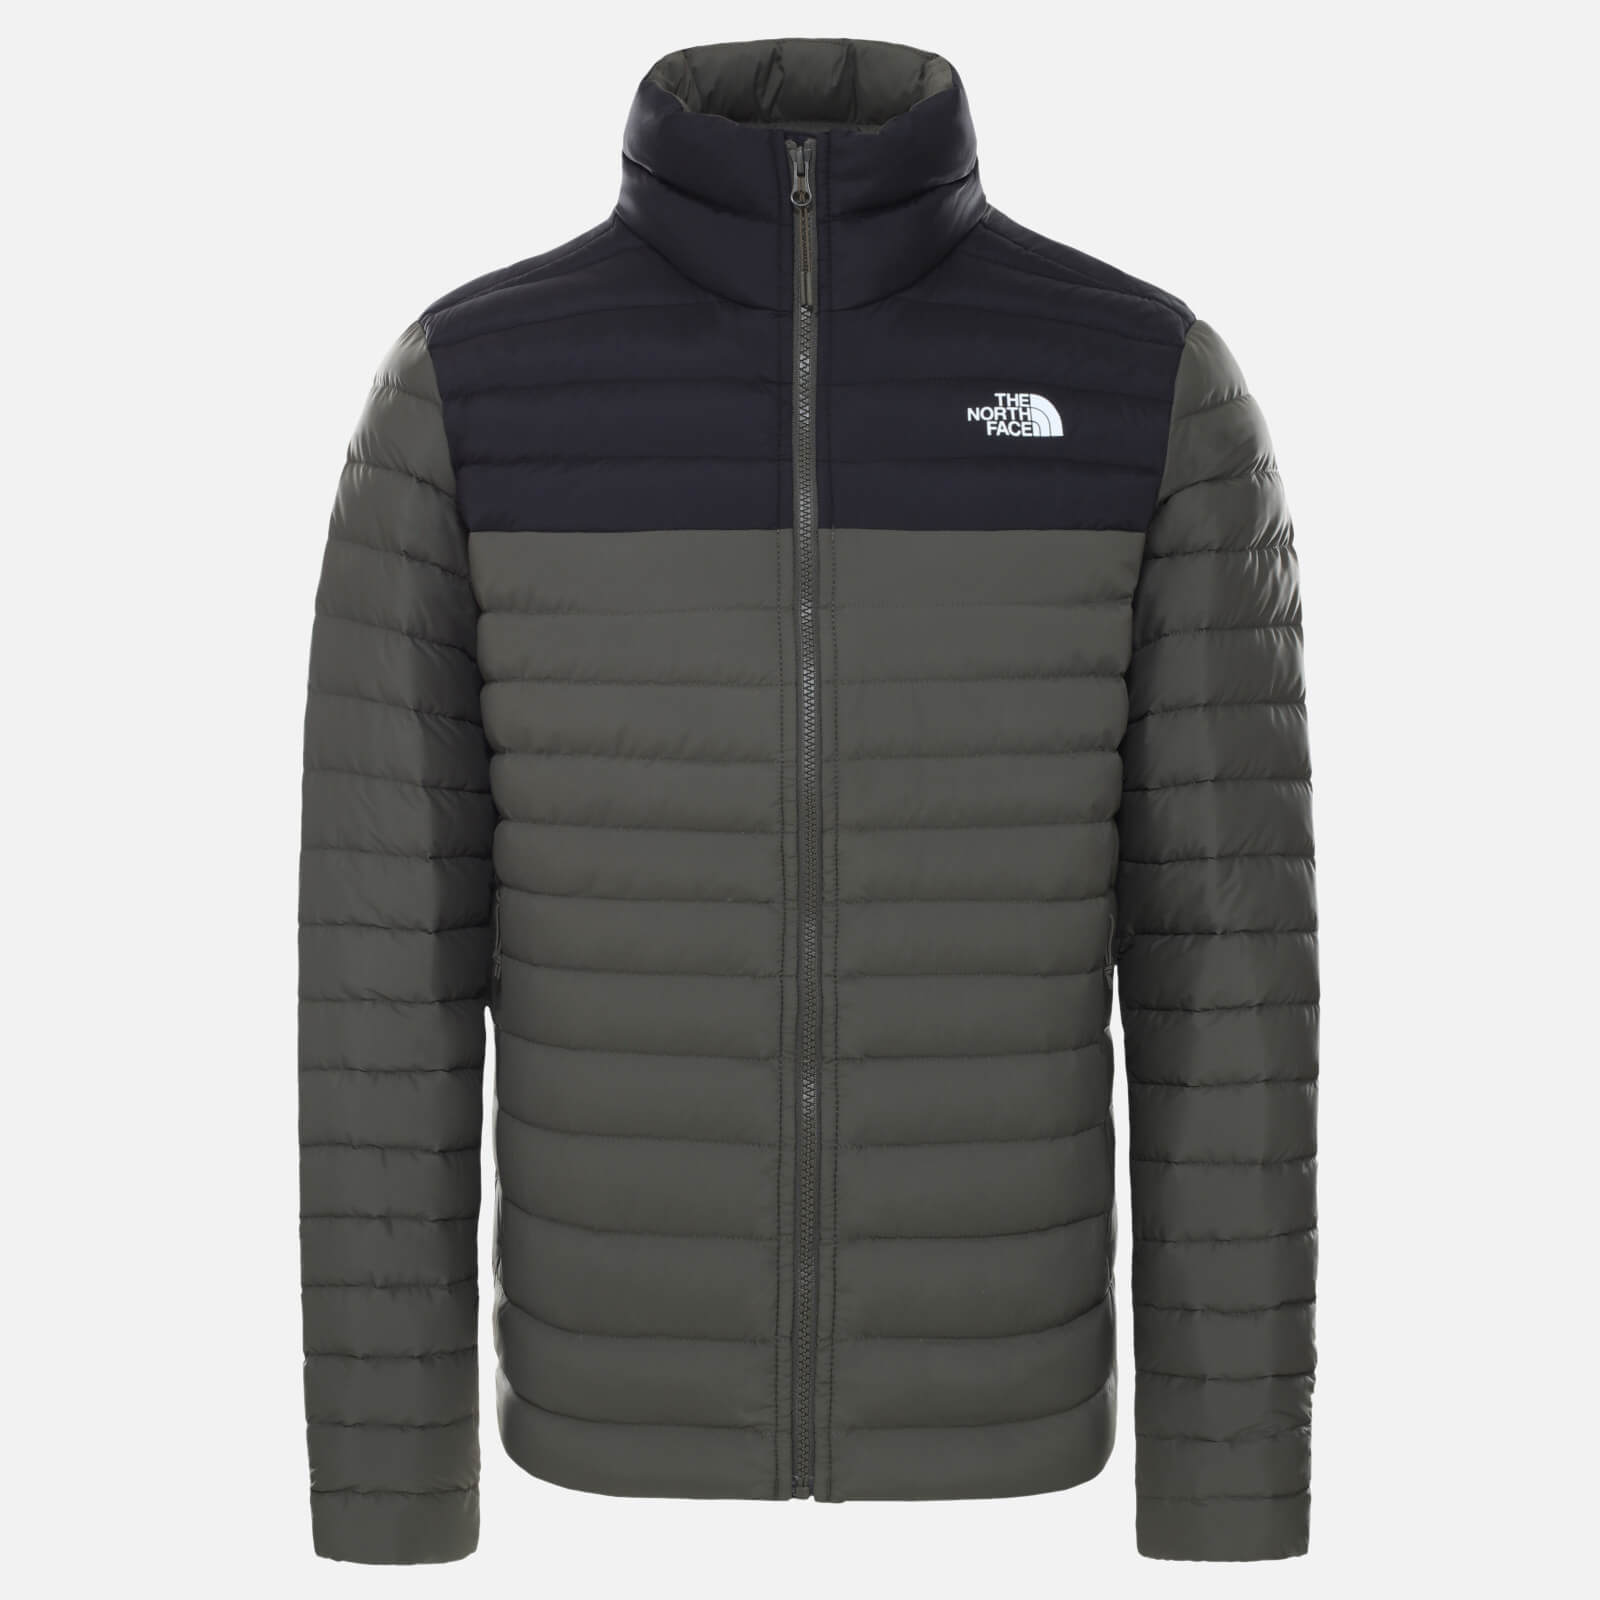 The North Face Men's Stretch Down Jacket - New Taupe Green/TNF Black - L